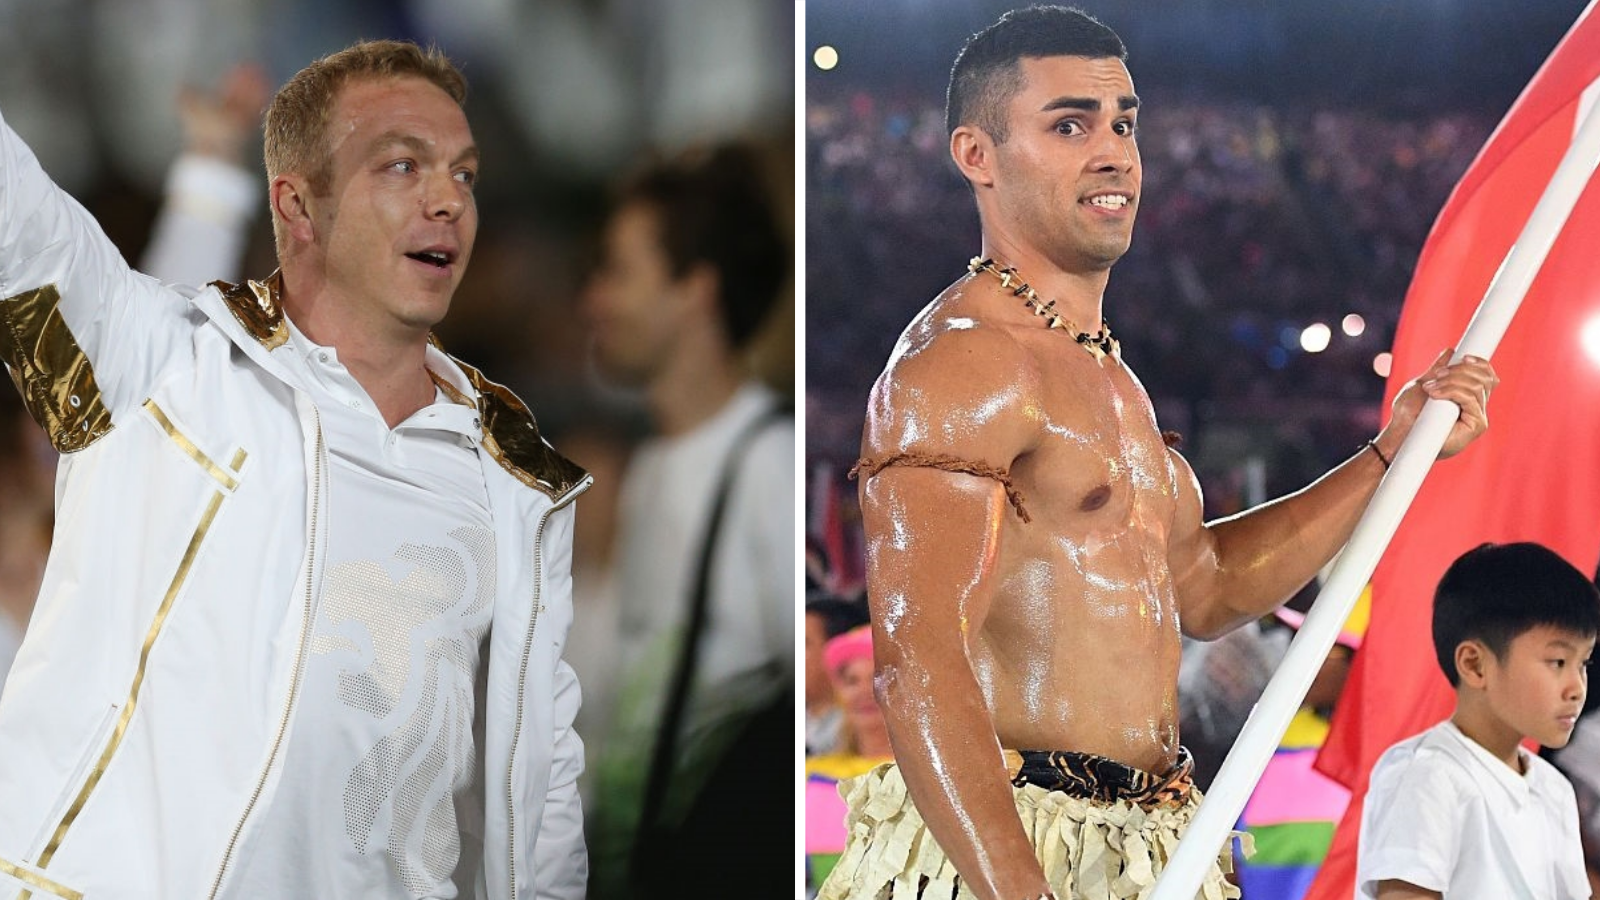 Olympics opening ceremony - the show-stopping outfits